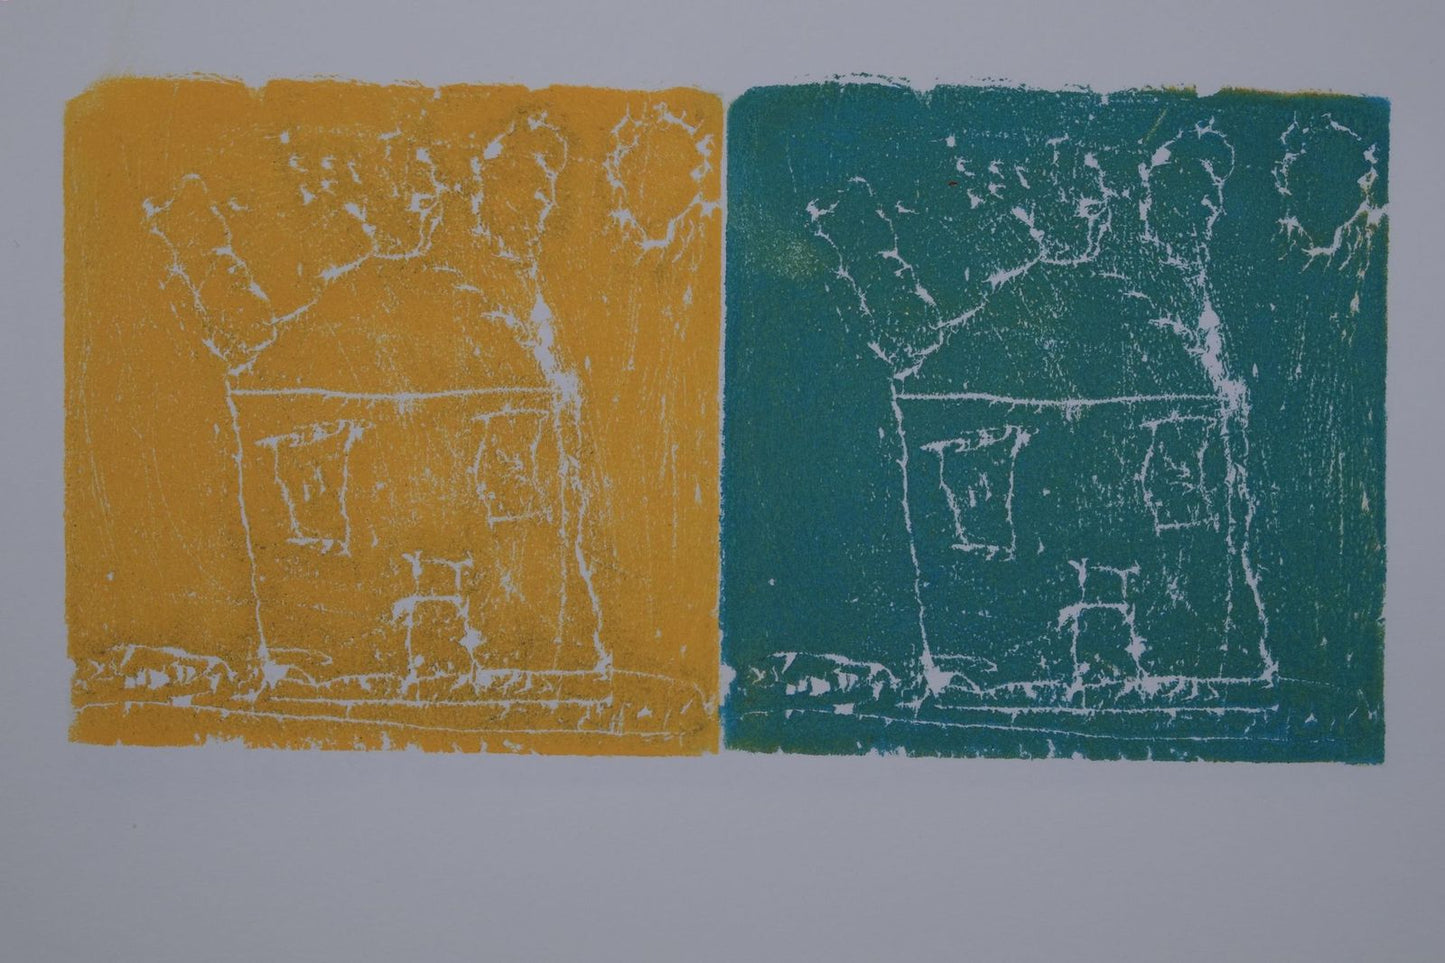 Ink on paper artwork with yellow block depicting a white house on the left and a teal block depicting a white house on the right